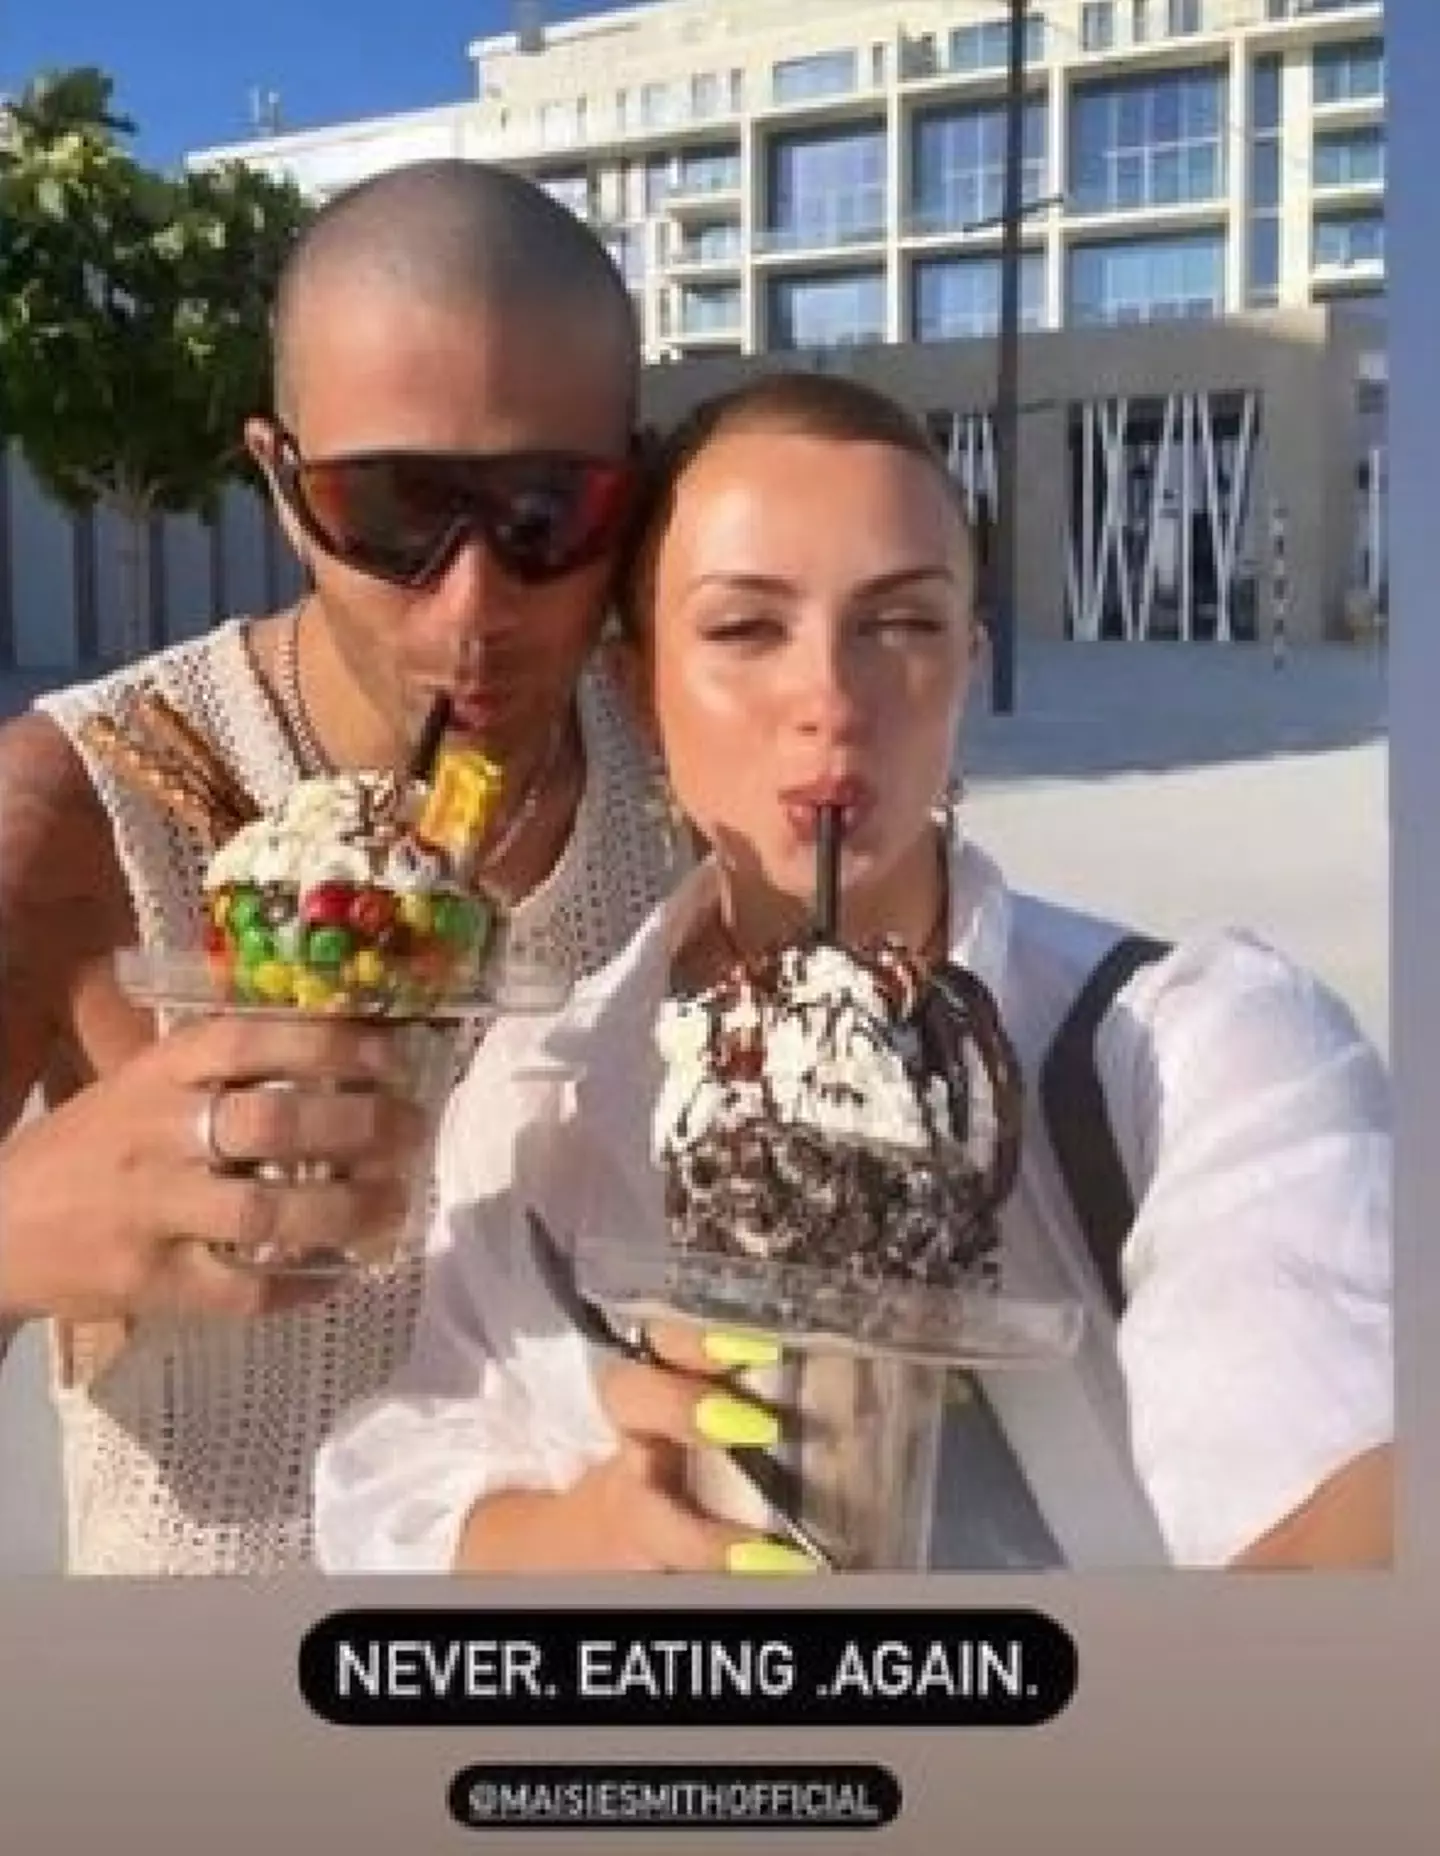 Max George later posted to Instagram appearing to make light of the backlash.